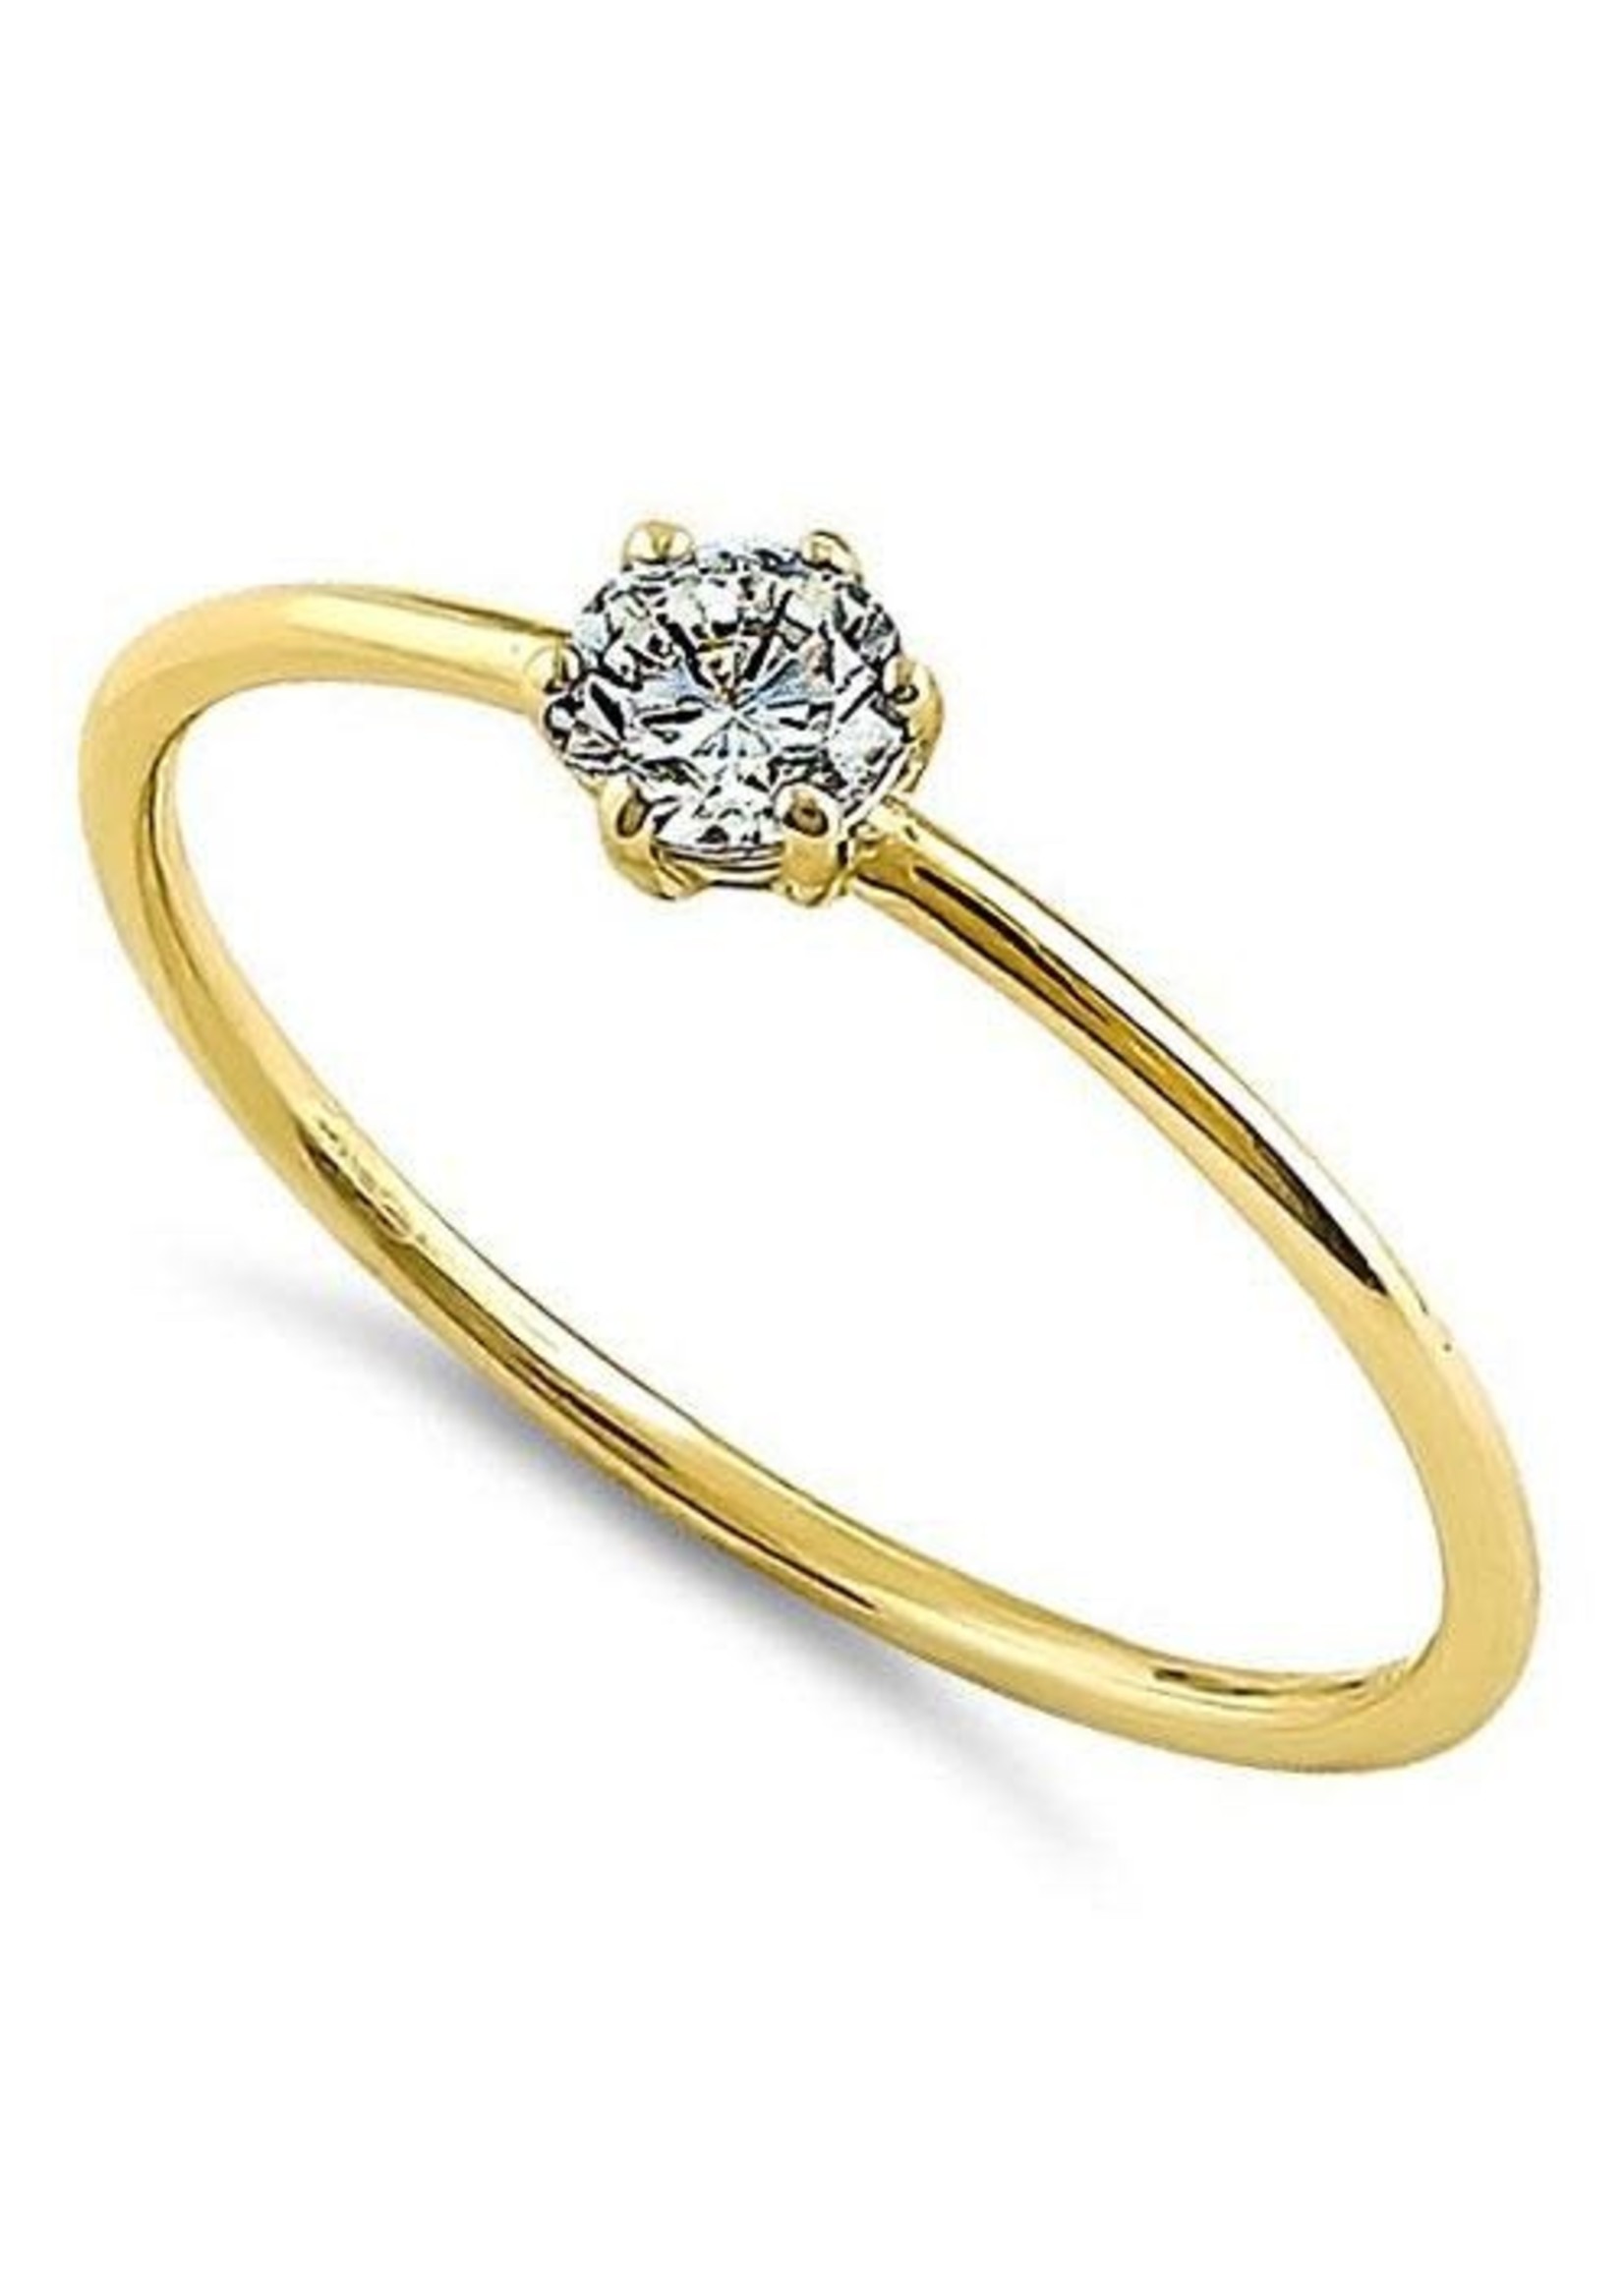 RLD 14K .25c Gold Solitaire Ring